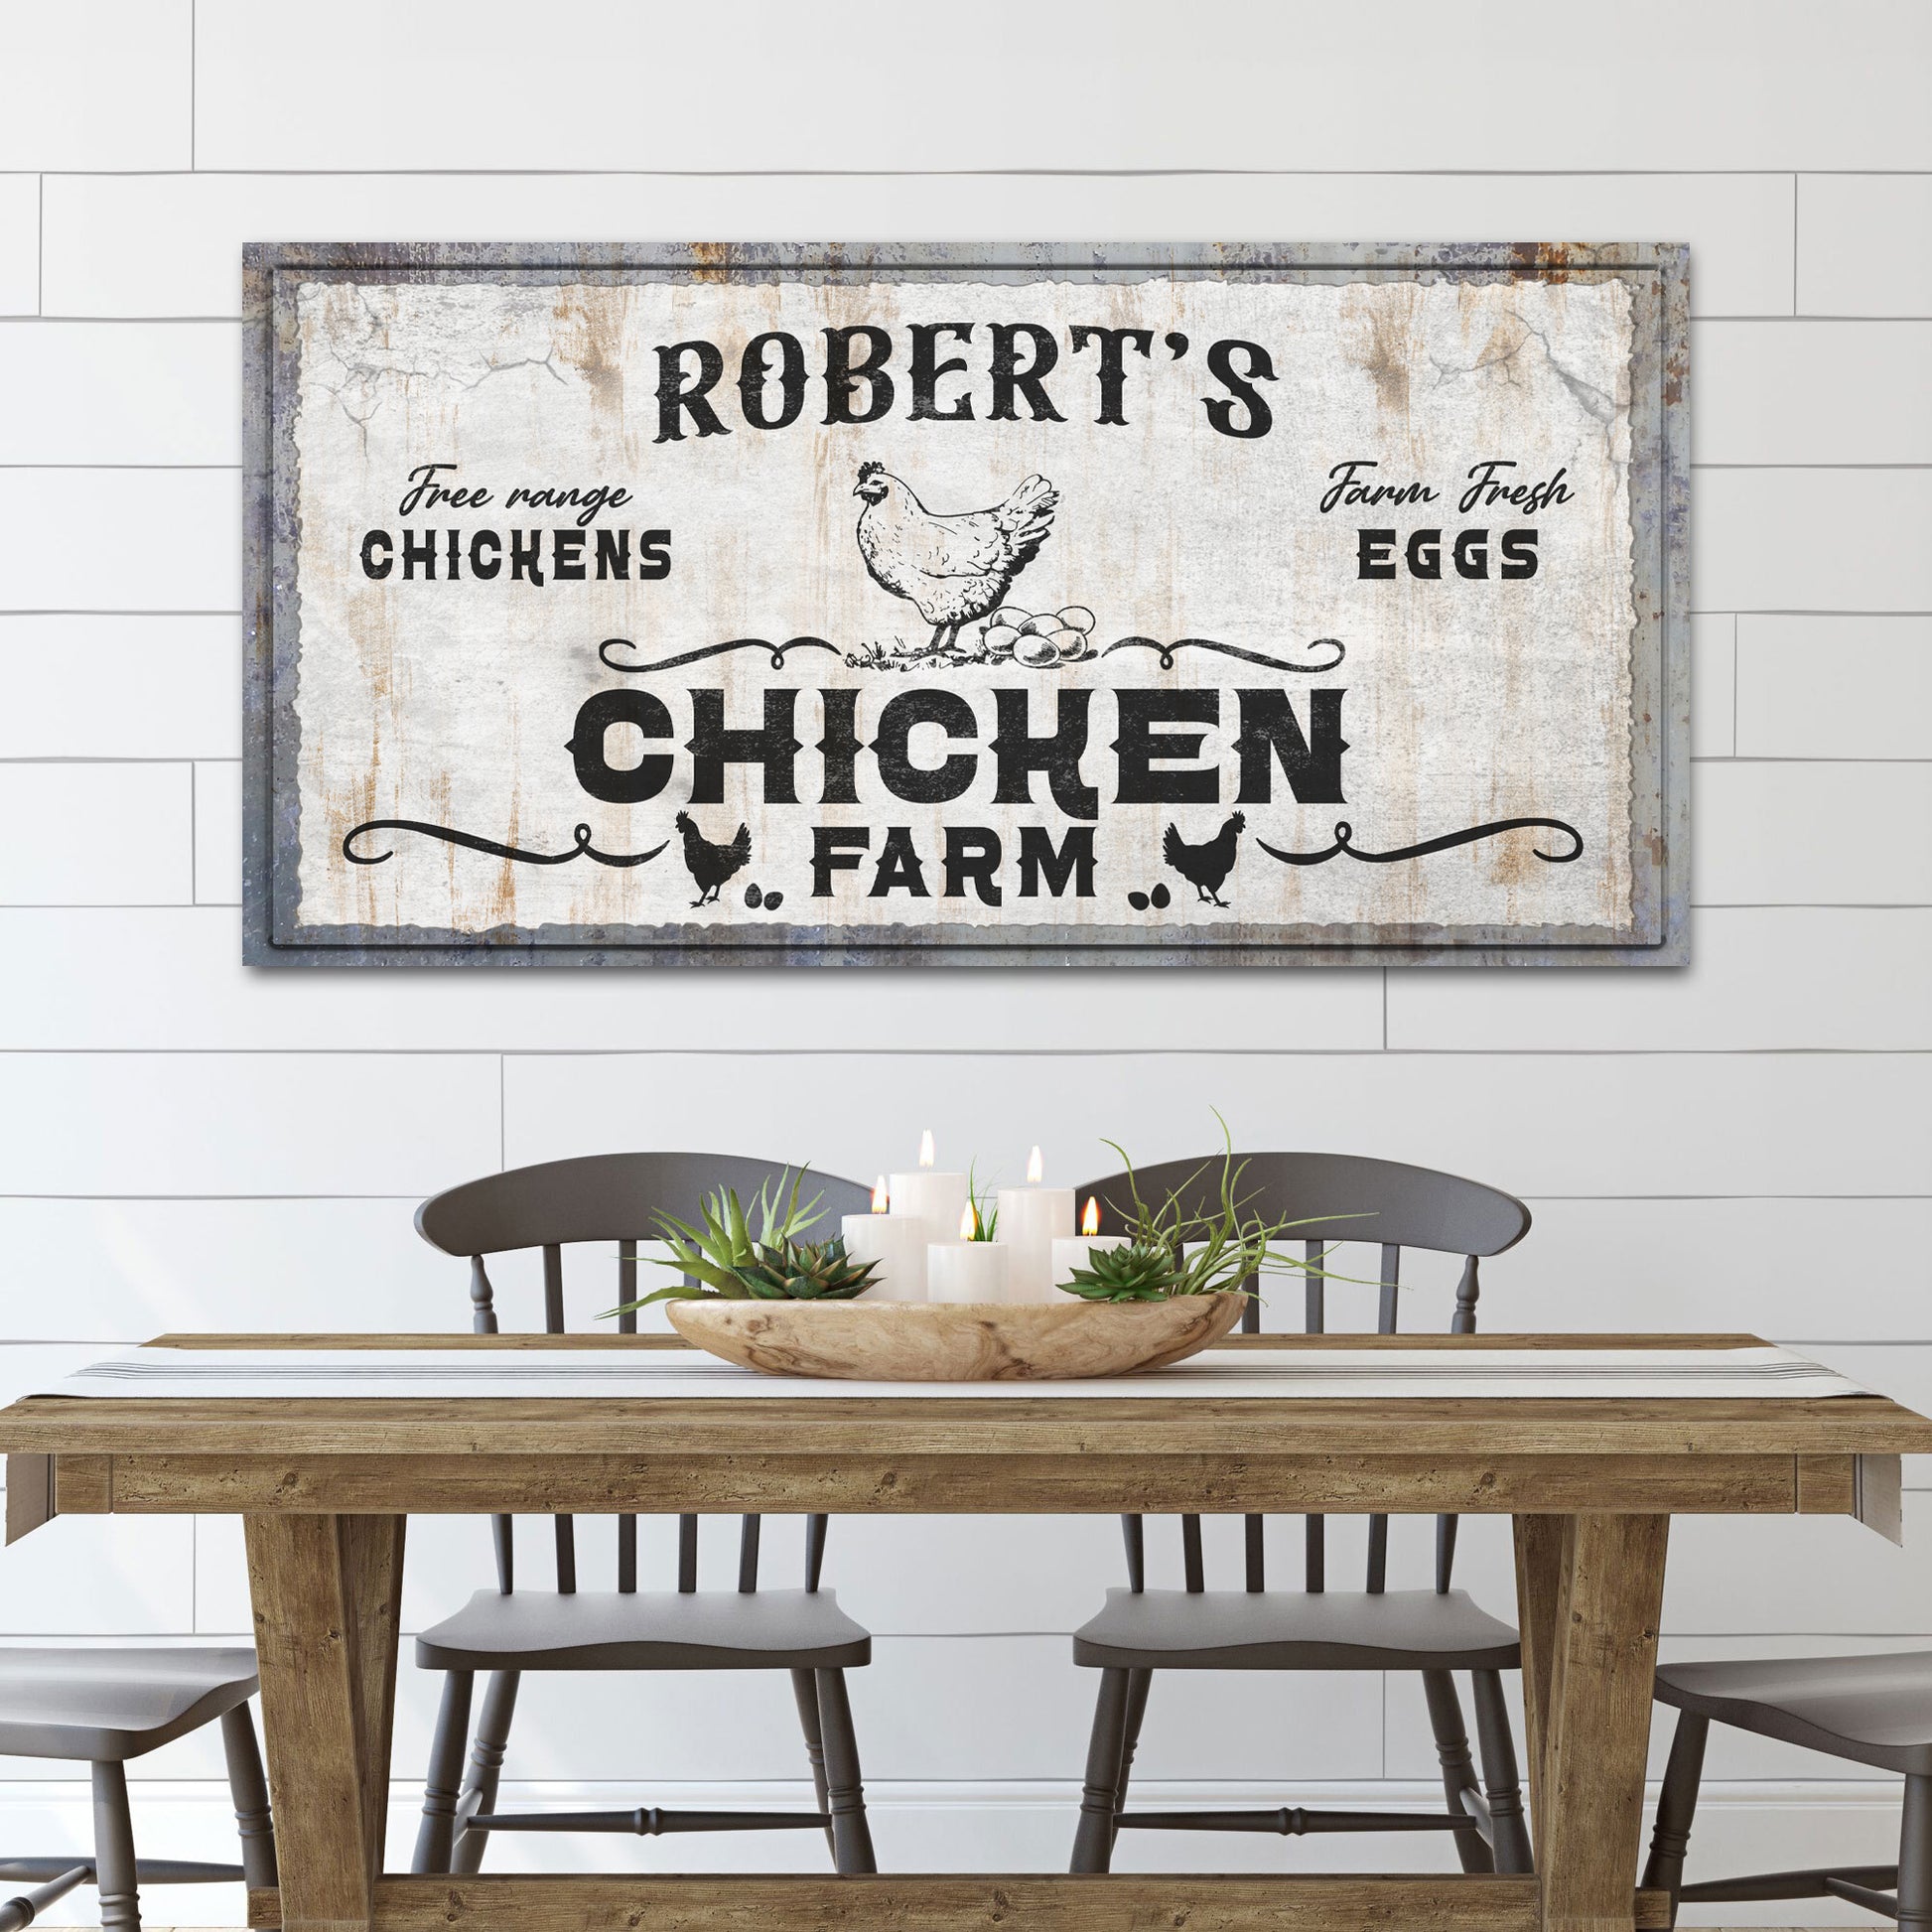 Free Range Chicken Farm Sign - Image by Tailored Canvases